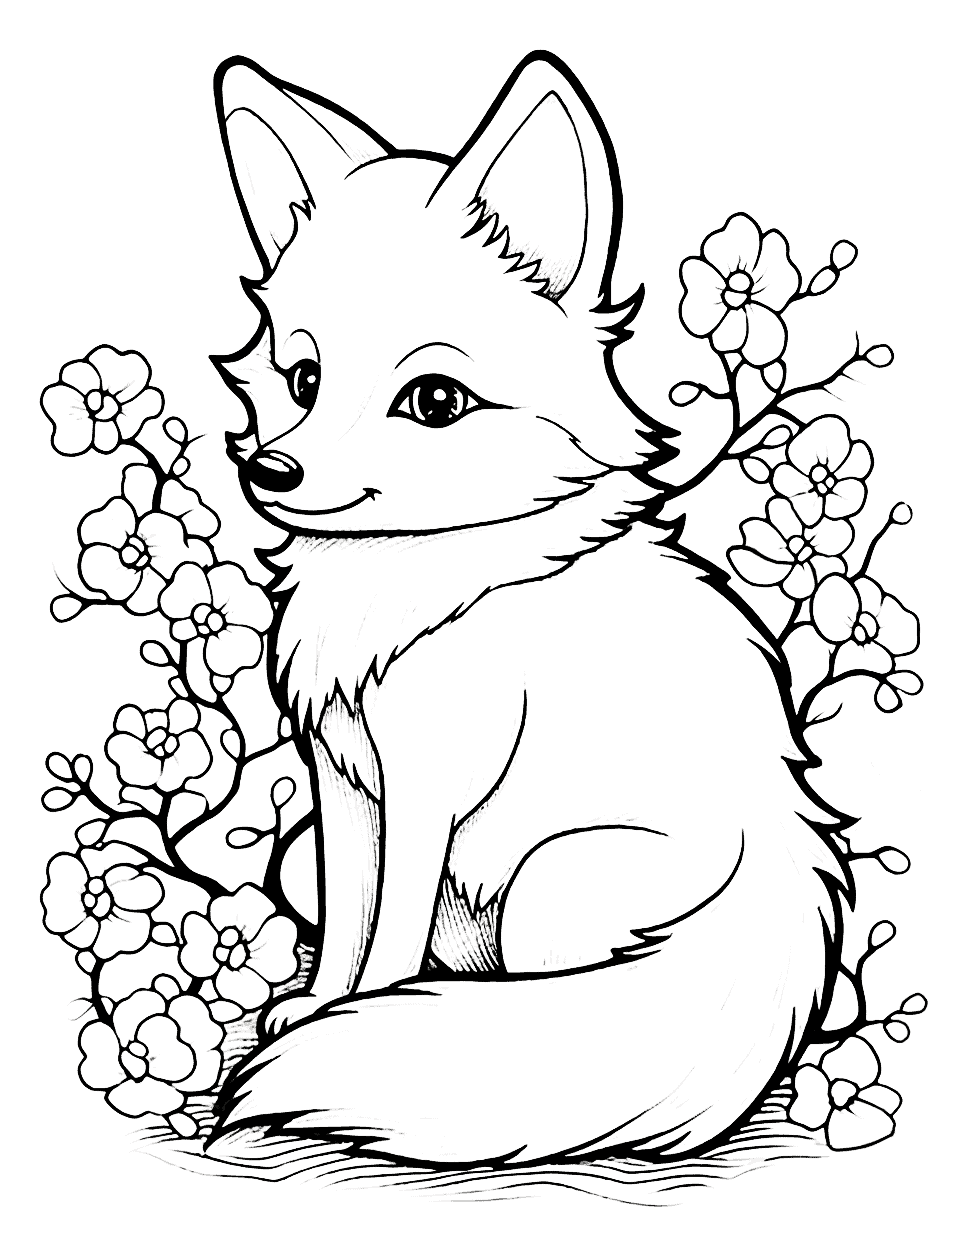 Cherry Blossom Fox Coloring Page - A fox amidst blooming cherry blossoms, a scene filled with tranquility.